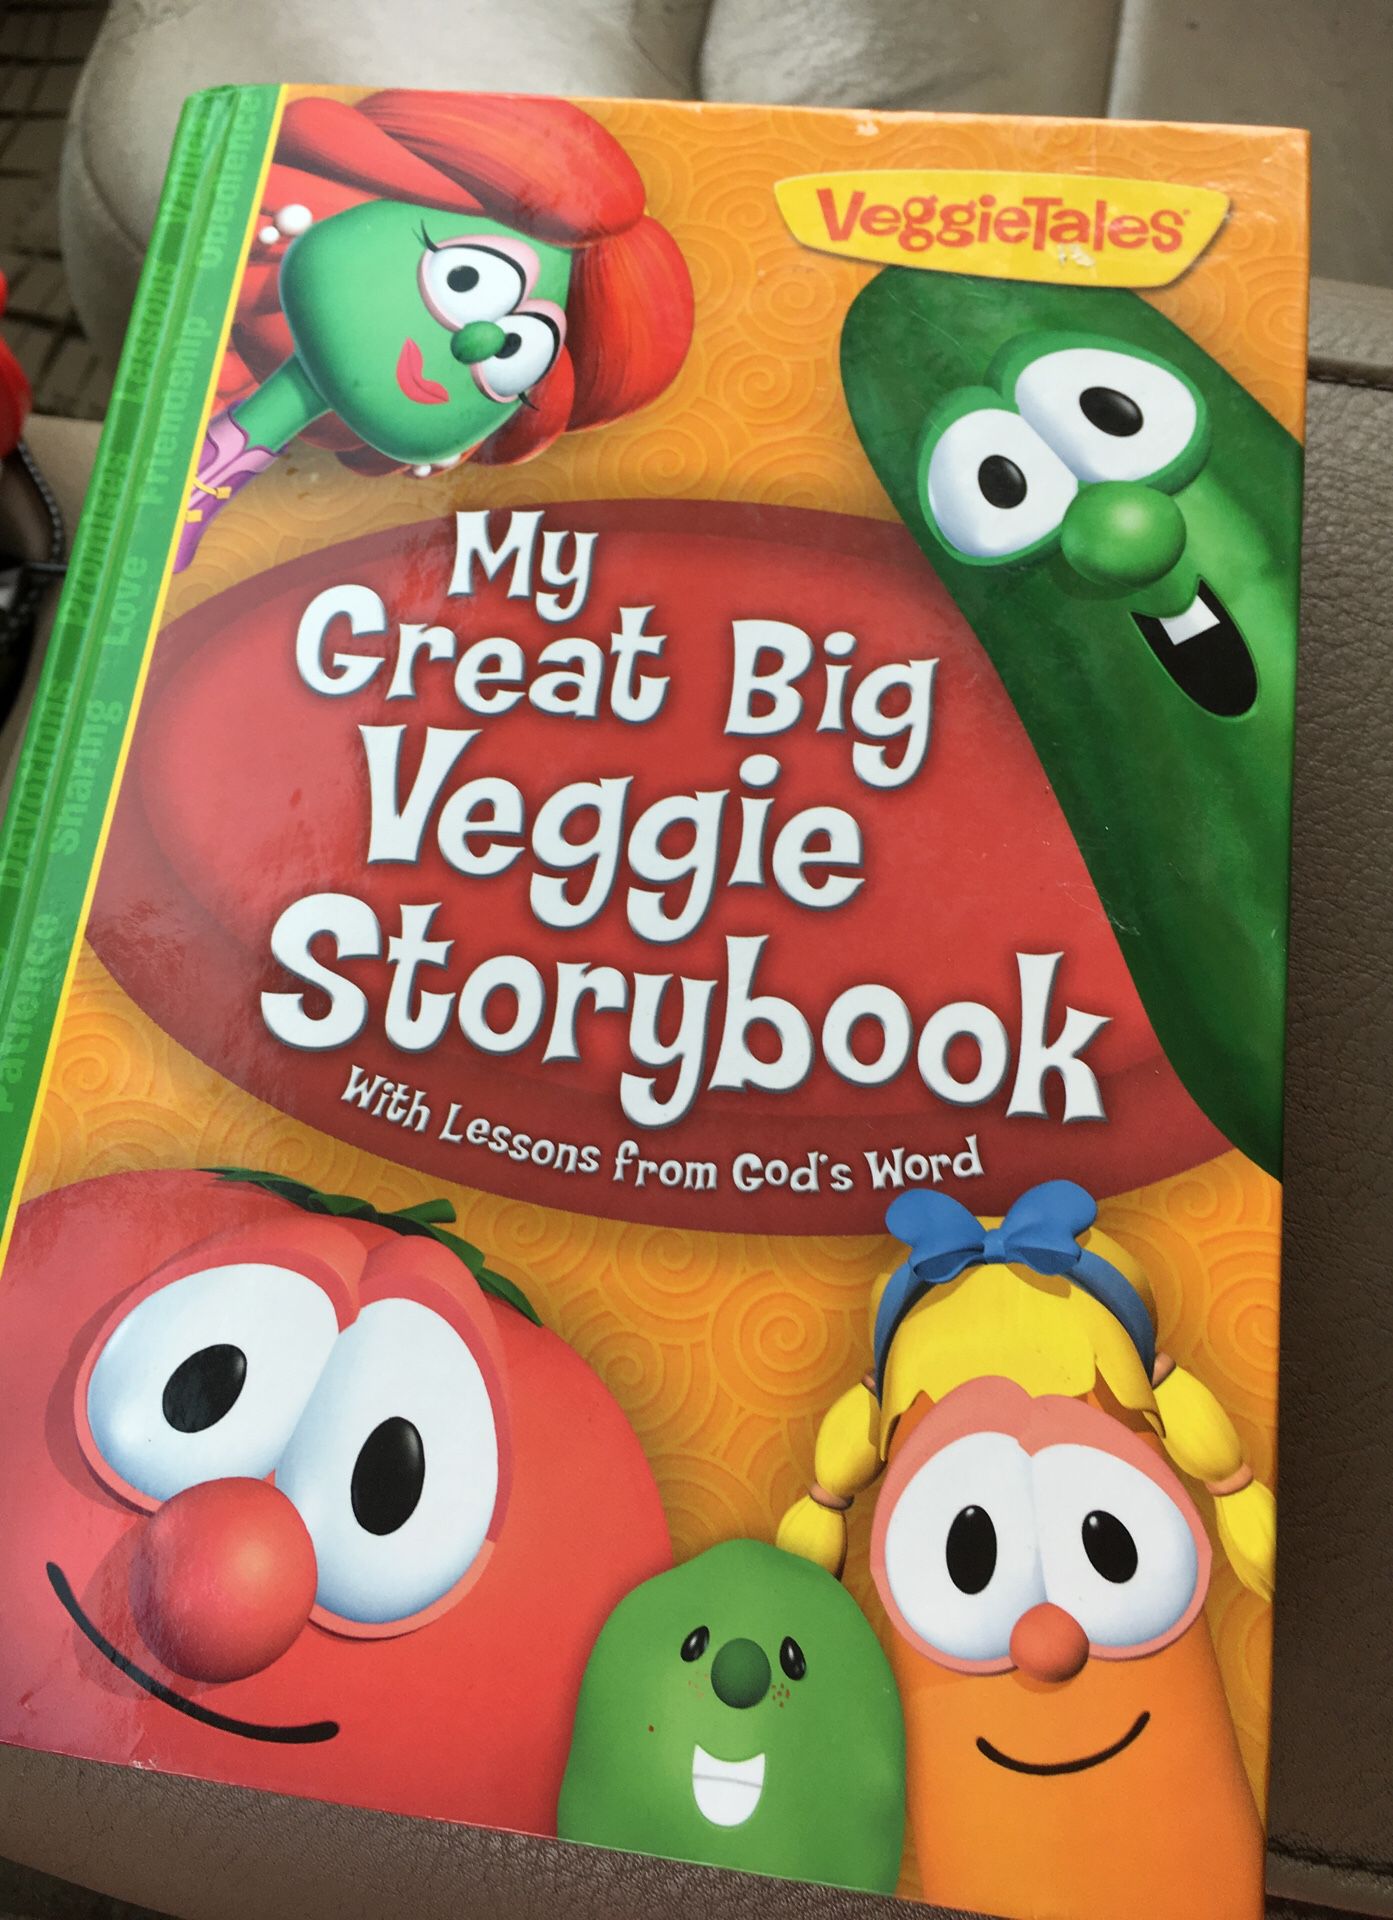 Hard cover clean veggie tales story book